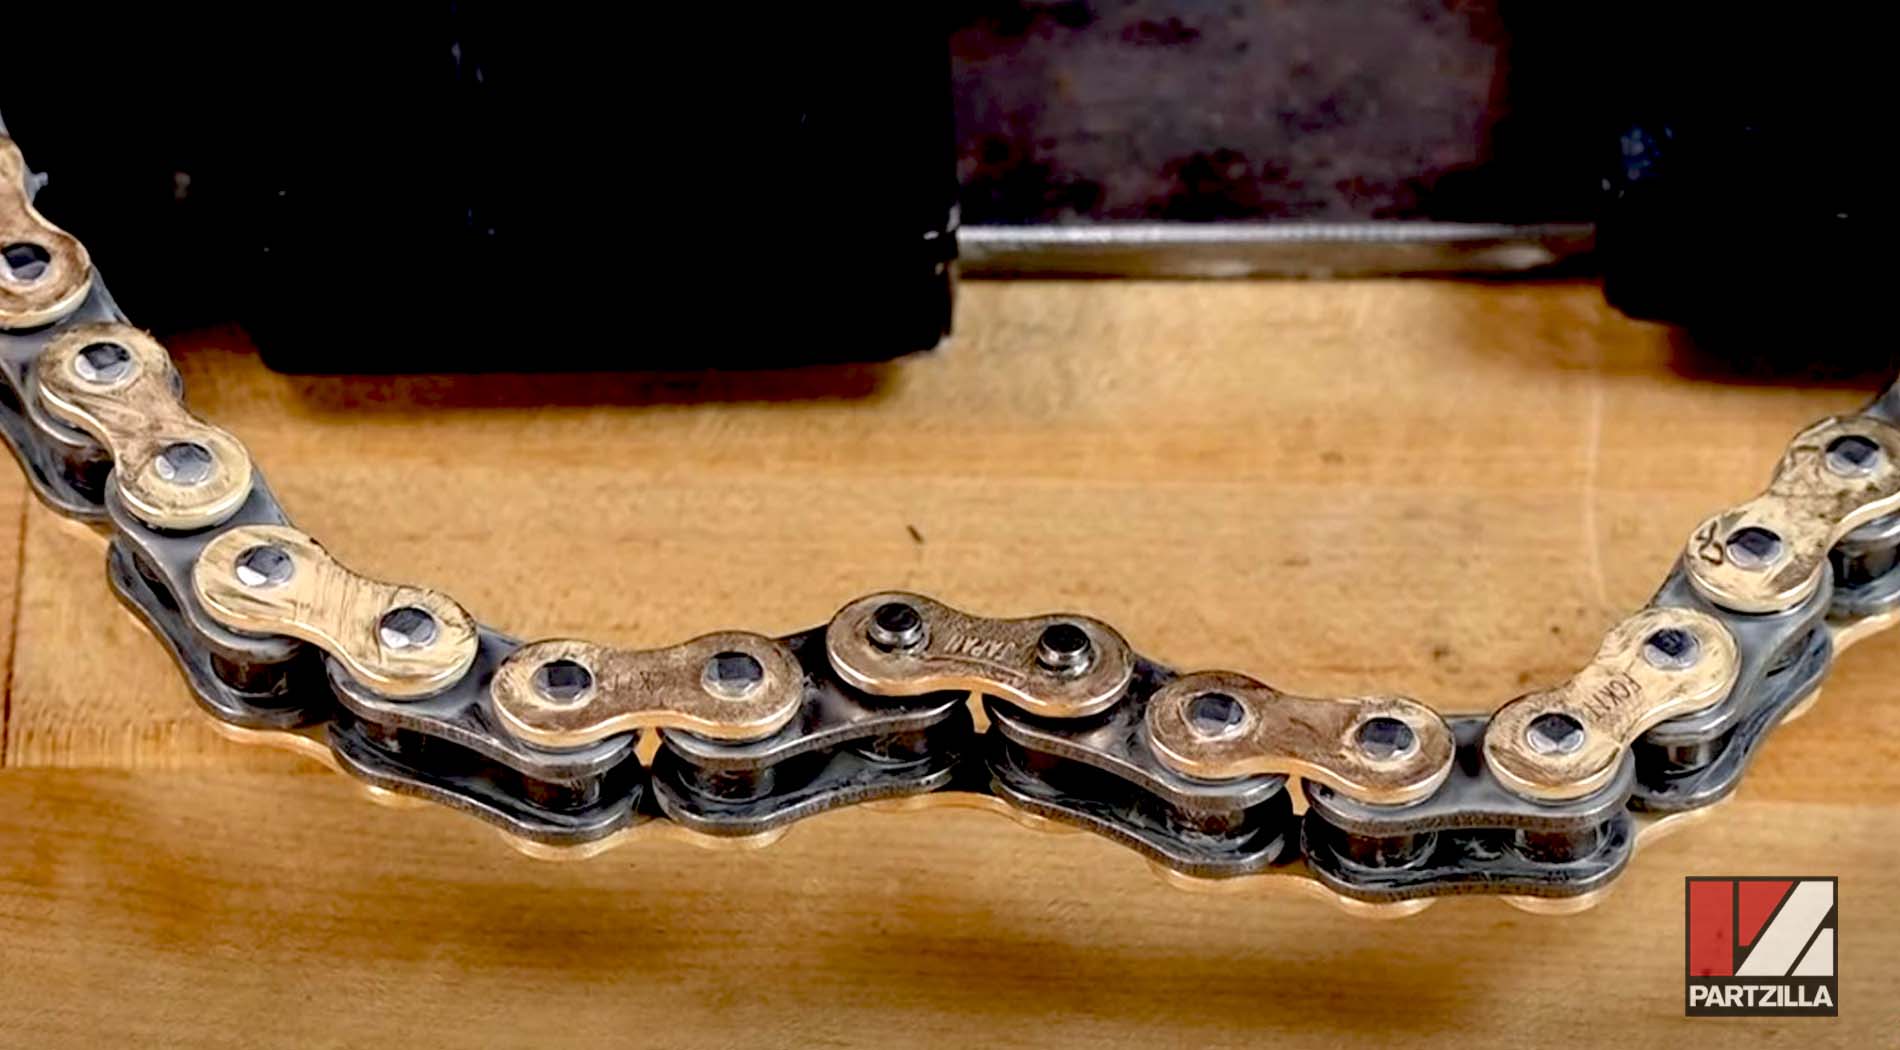 Motion Pro motorcycle chain tools